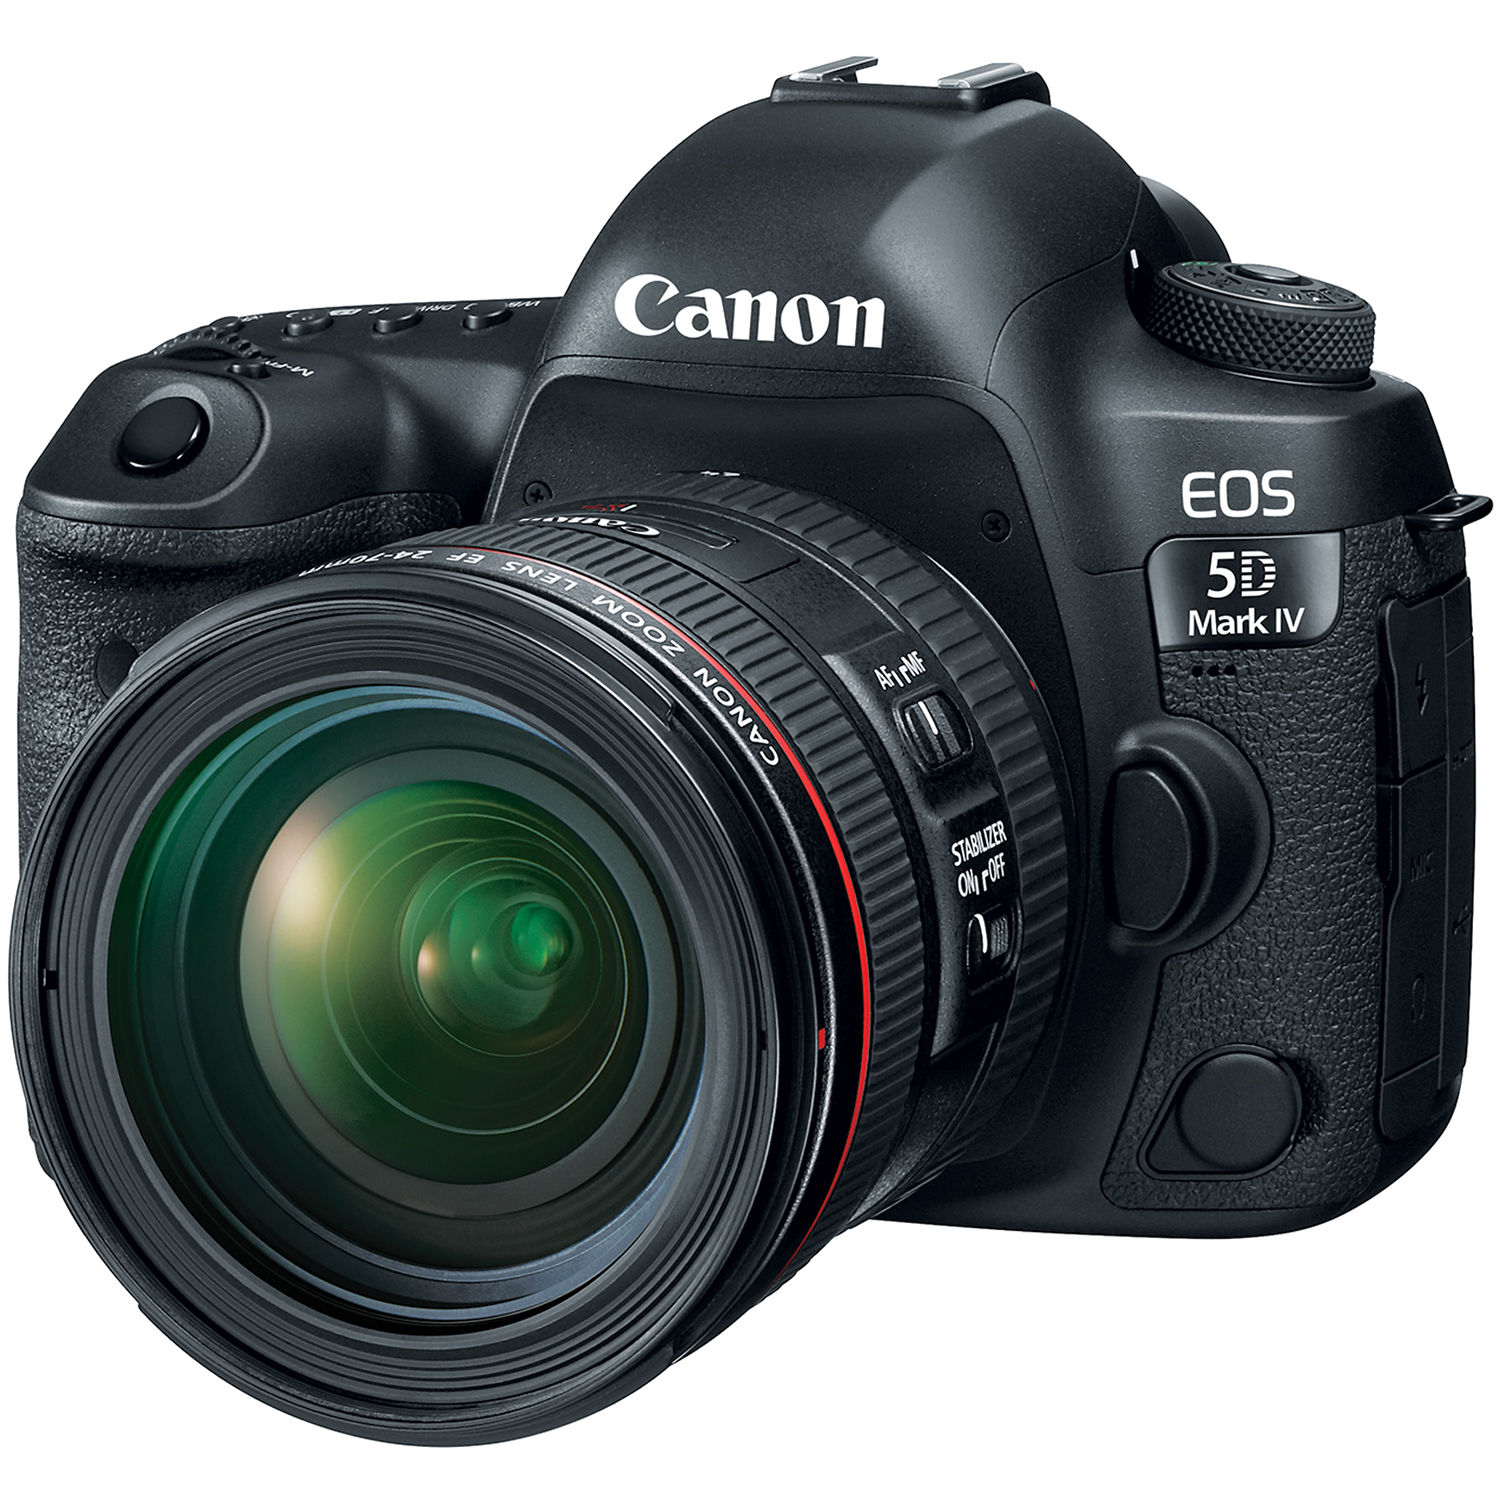 Canon EOS 5D Mark IV with 24-70mm f/4L Lens